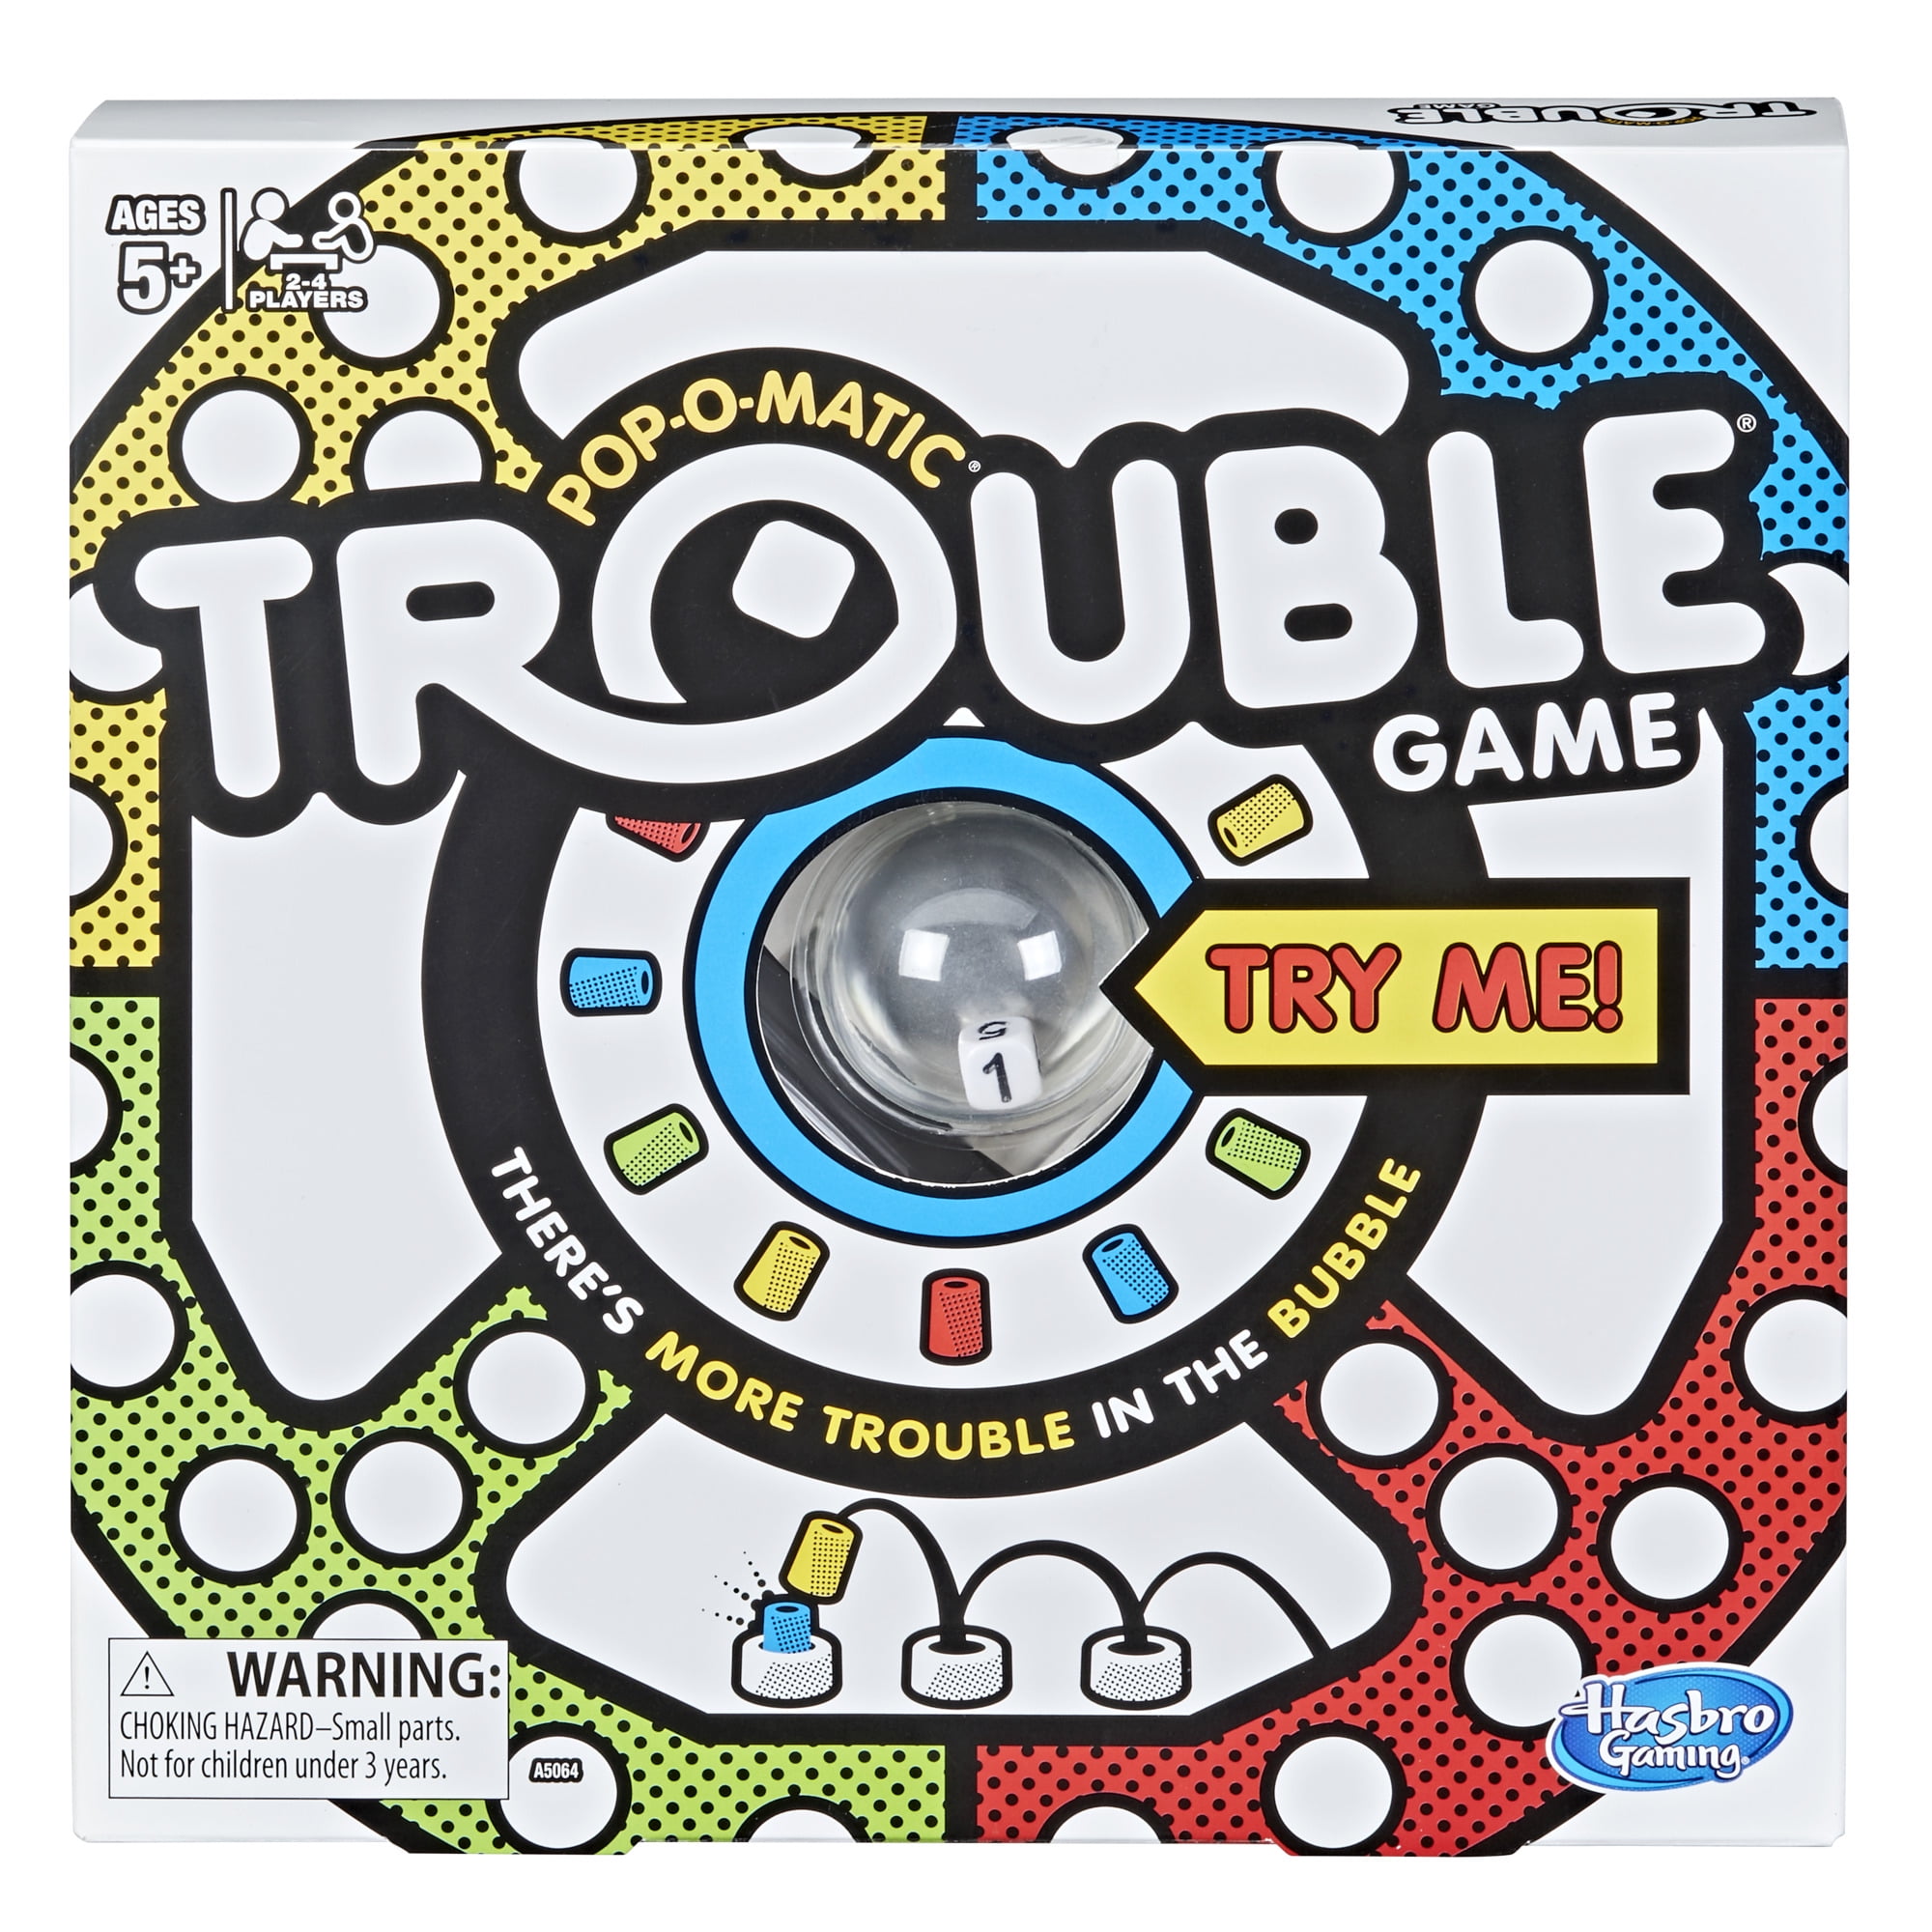 Trouble Game, Pop-O-Matic, Kids & Family Party Board Game with 16 Pegs -  